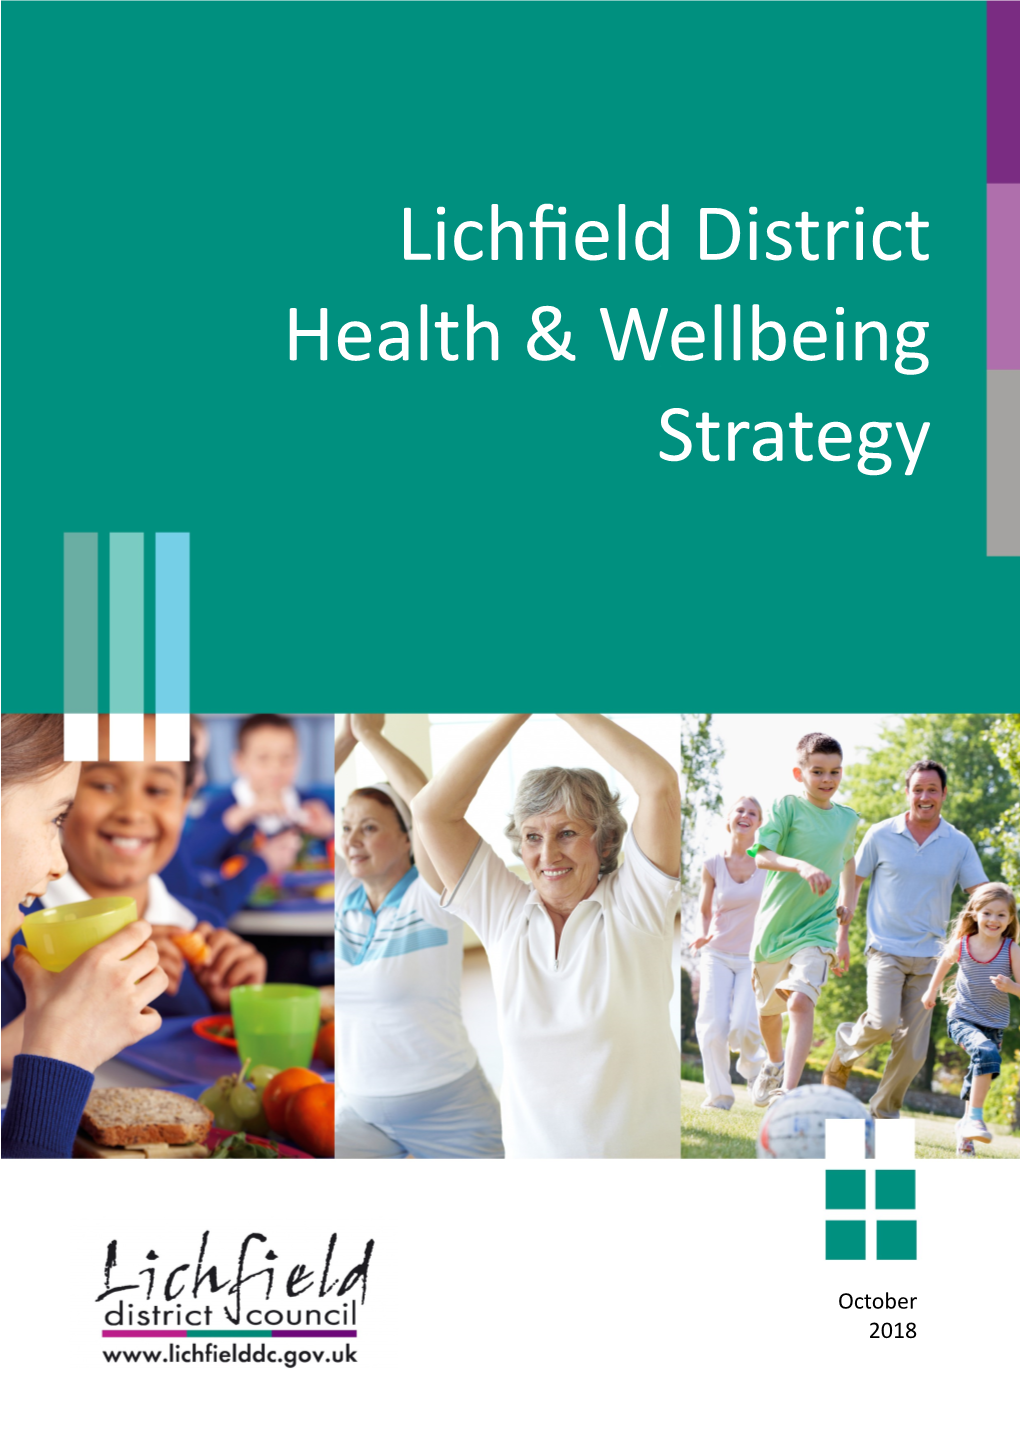 Health and Wellbeing Strategy, in Which We Set out How a Whole Range of Council Services and Activities Contribute Towards the Health and Wellbeing of Our Residents